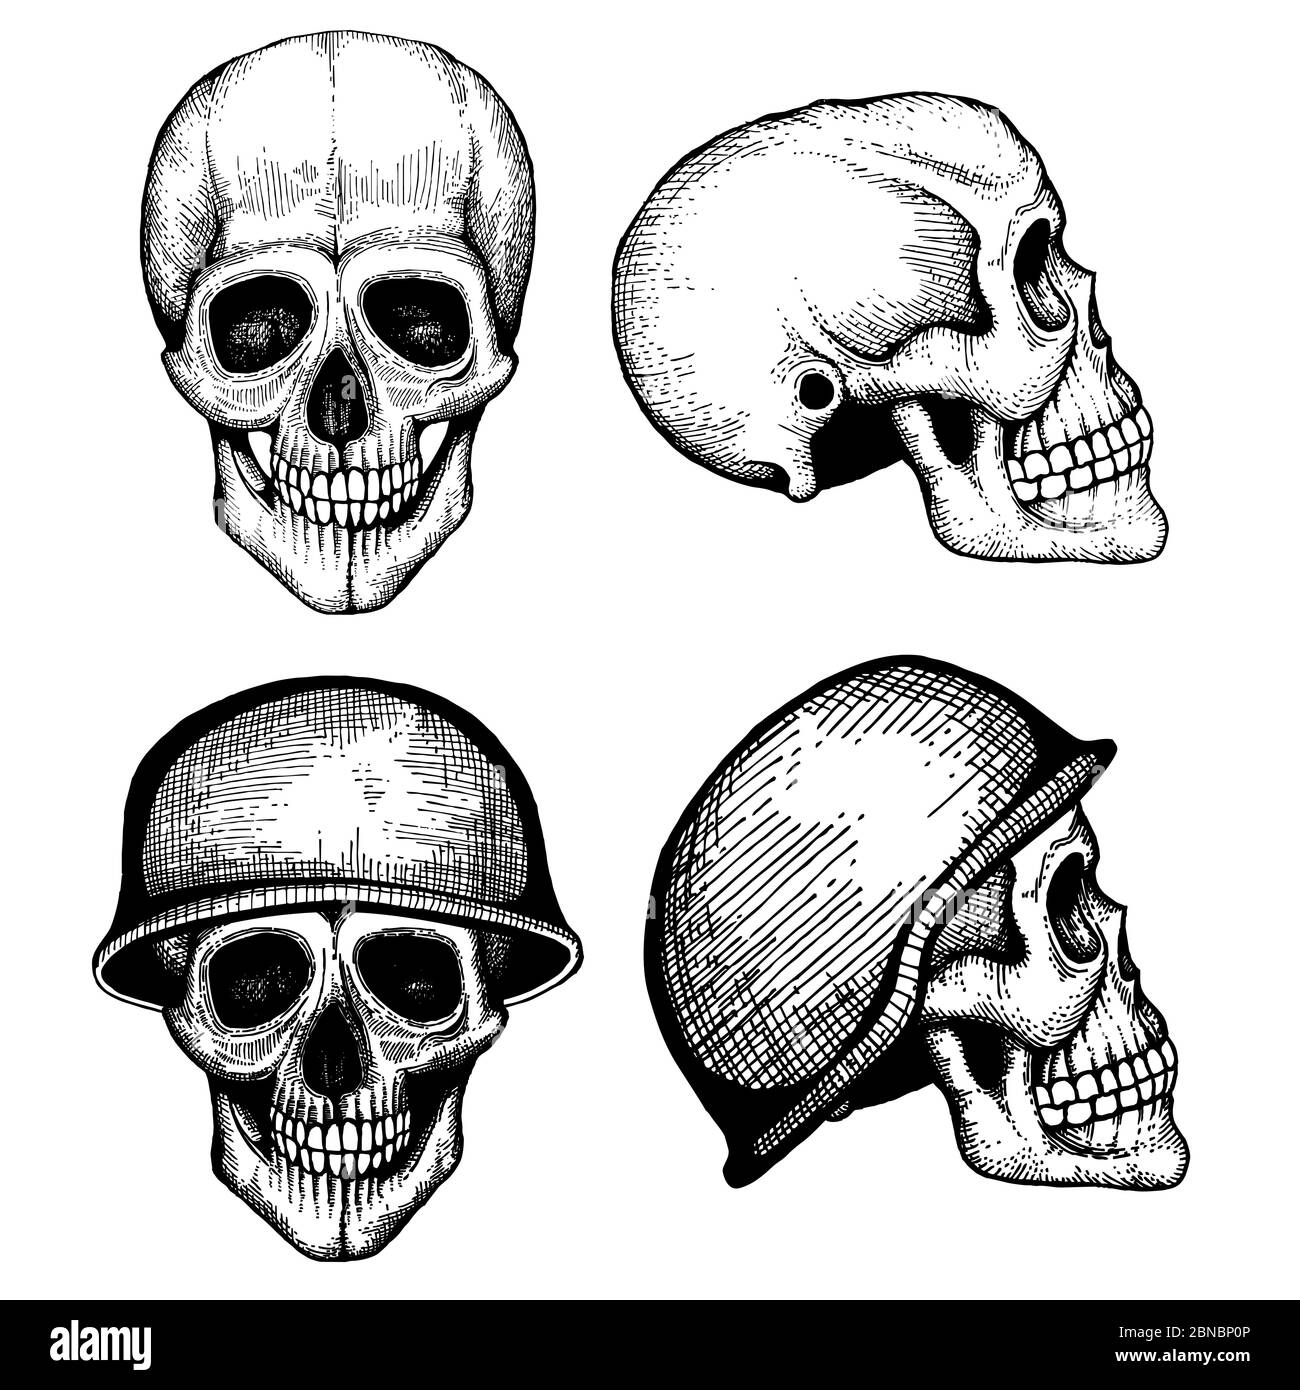 Hand drawn vector death scary human skulls vintage style isolated on white background illustration Stock Vector